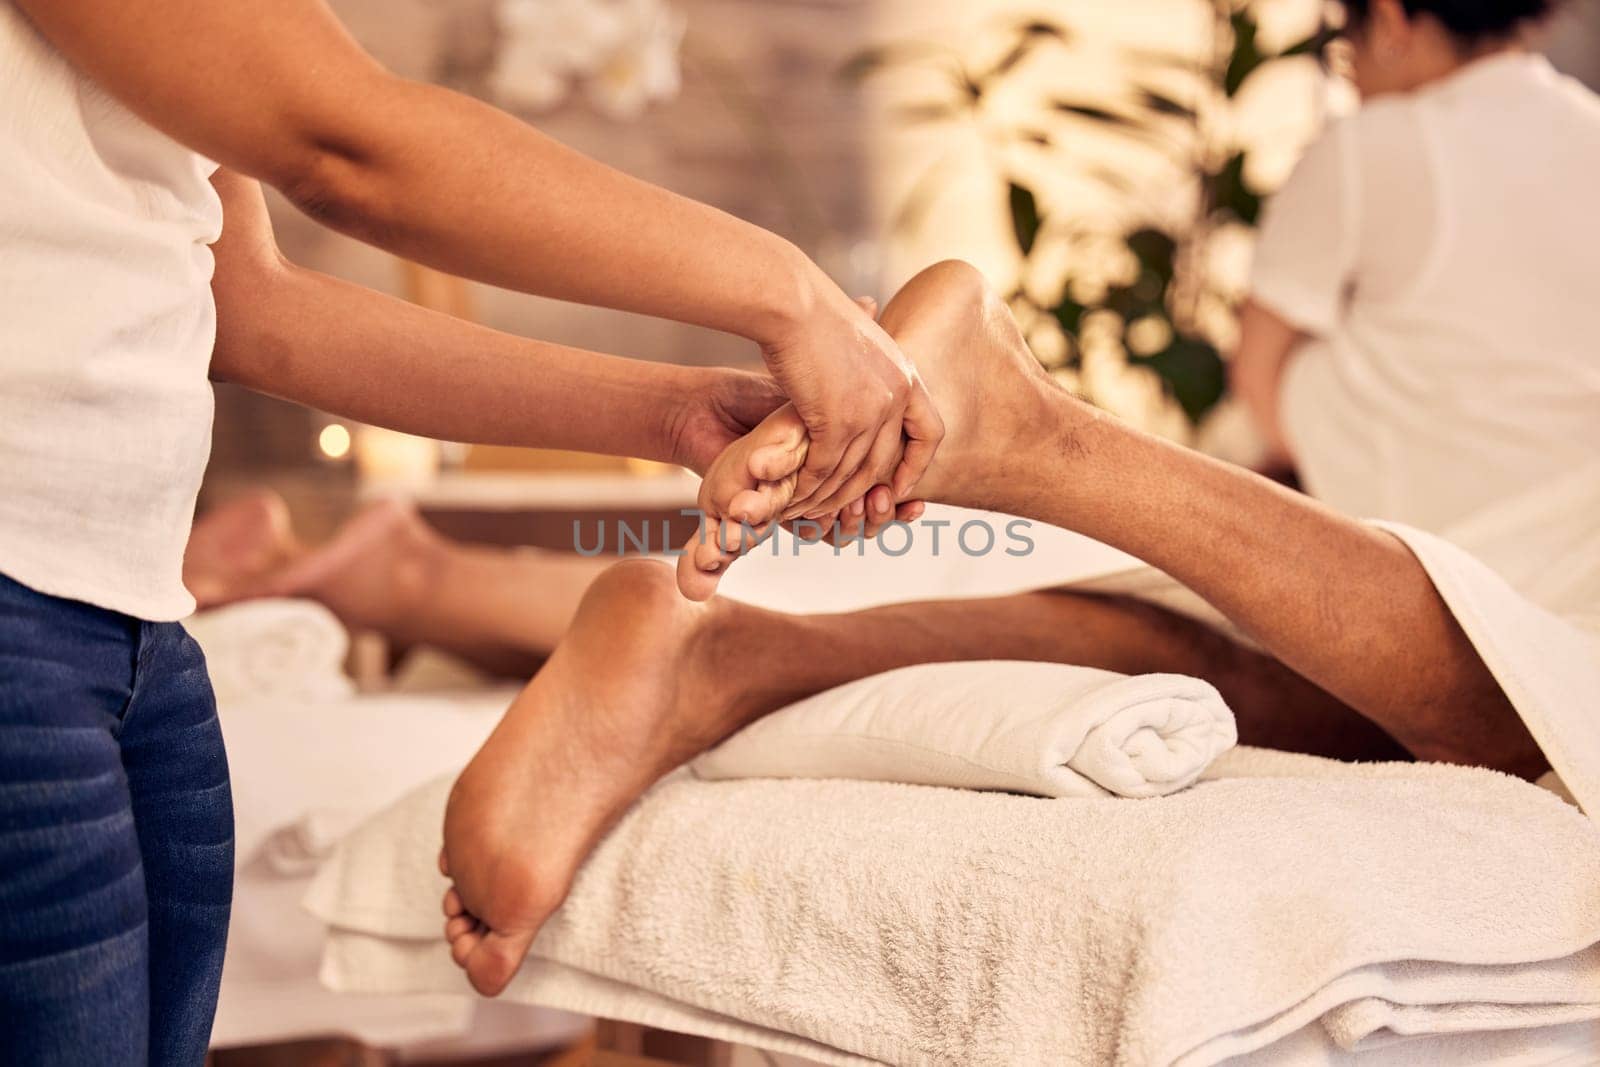 Foot therapist, massage and people at spa for acupressure treatment, holistic therapy or beauty salon. Closeup of feet for skincare, pedicure or muscle reflexology for circulation at wellness service by YuriArcurs